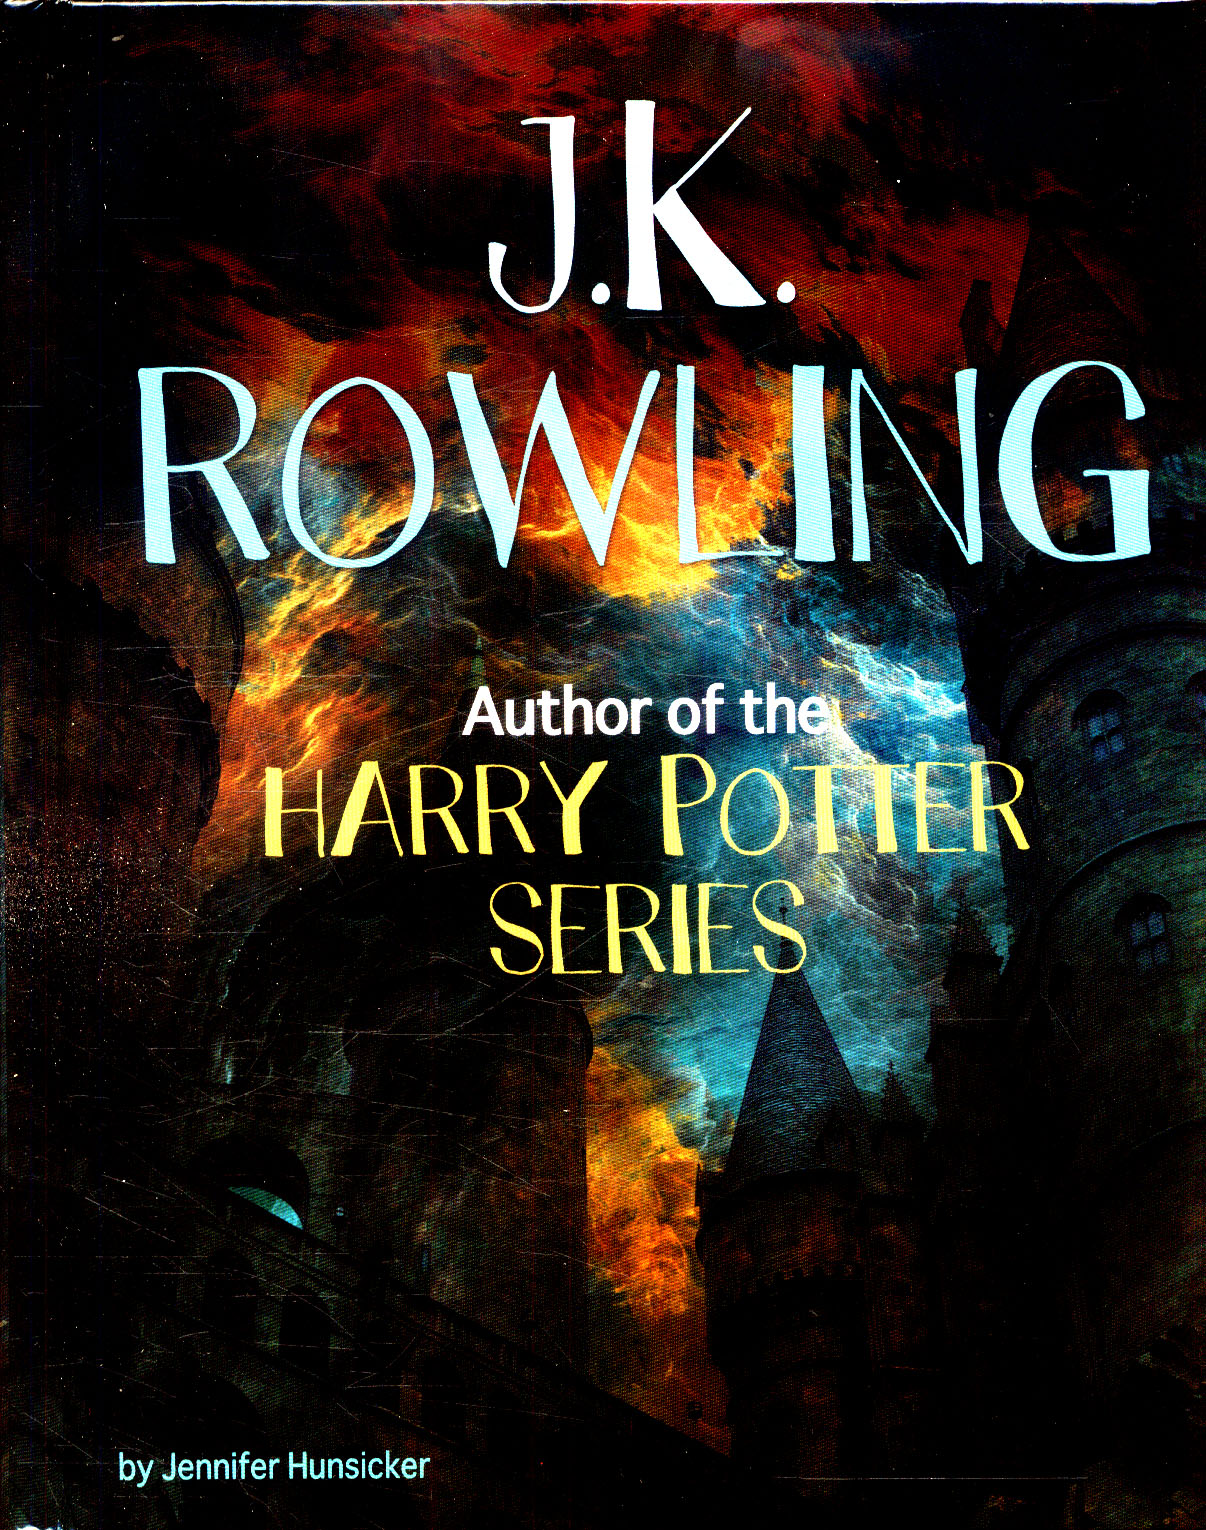 book review of harry potter by jk rowling